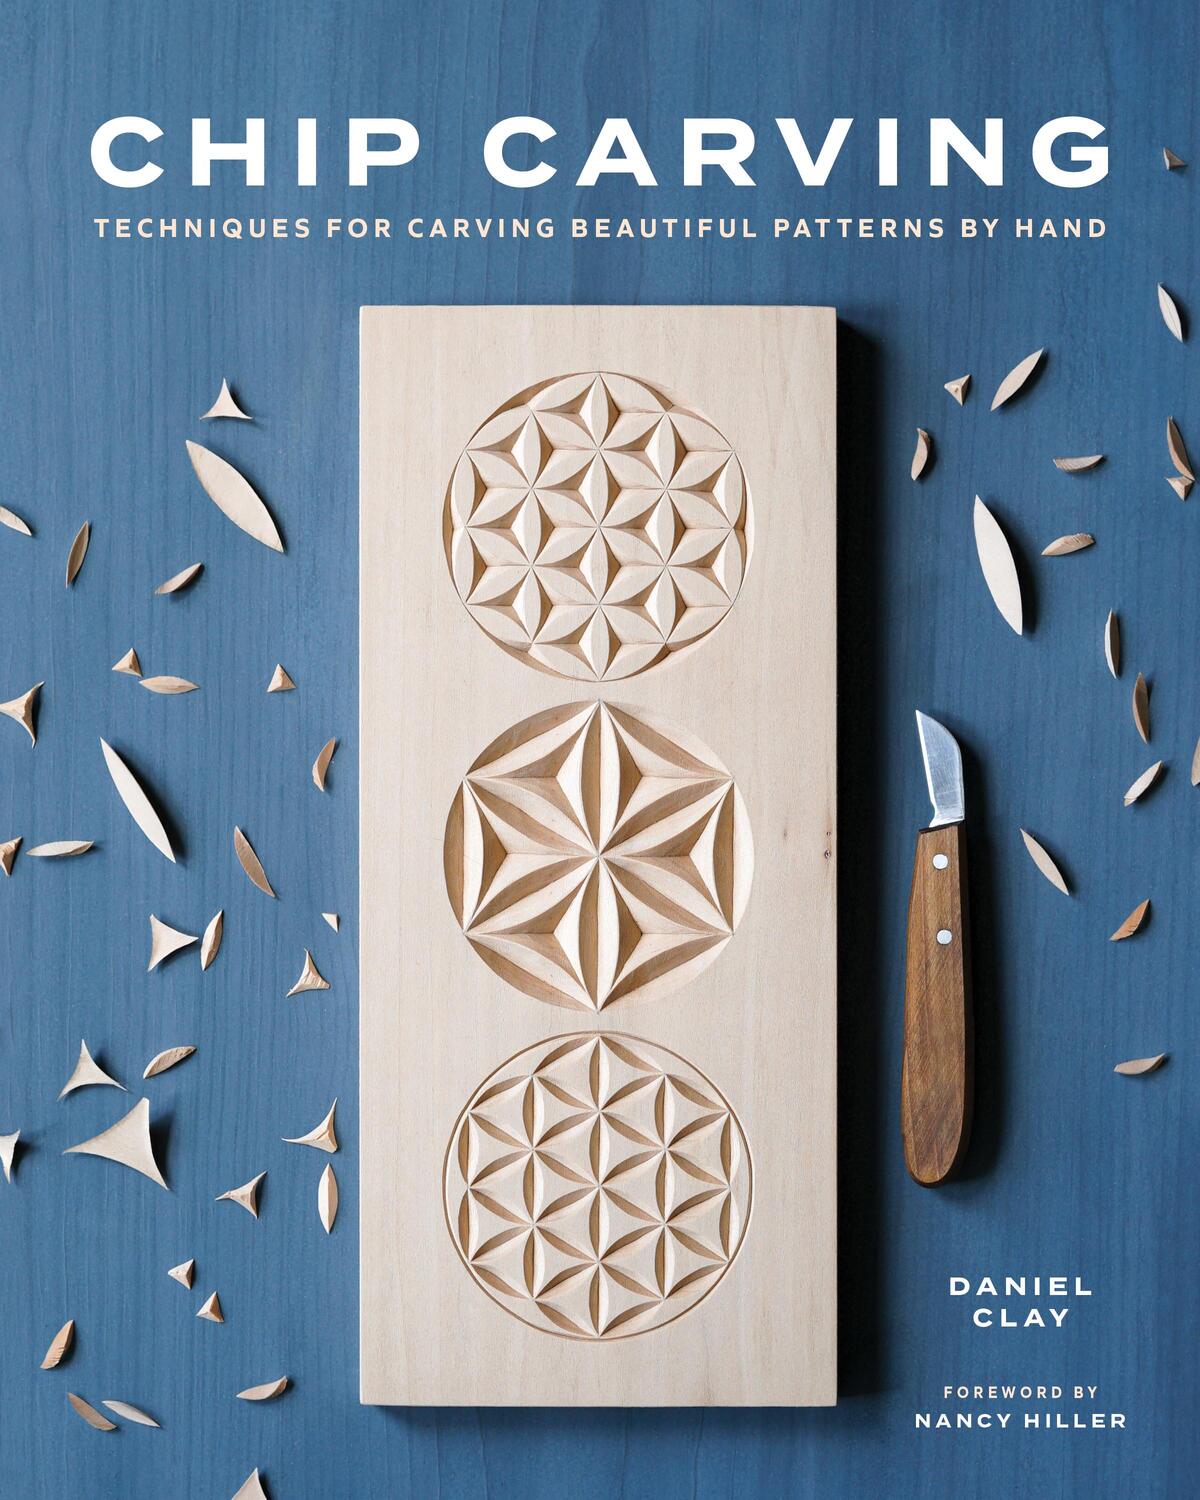 Bild: 9781951217402 | Chip Carving | Techniques for Carving Beautiful Patterns by Hand